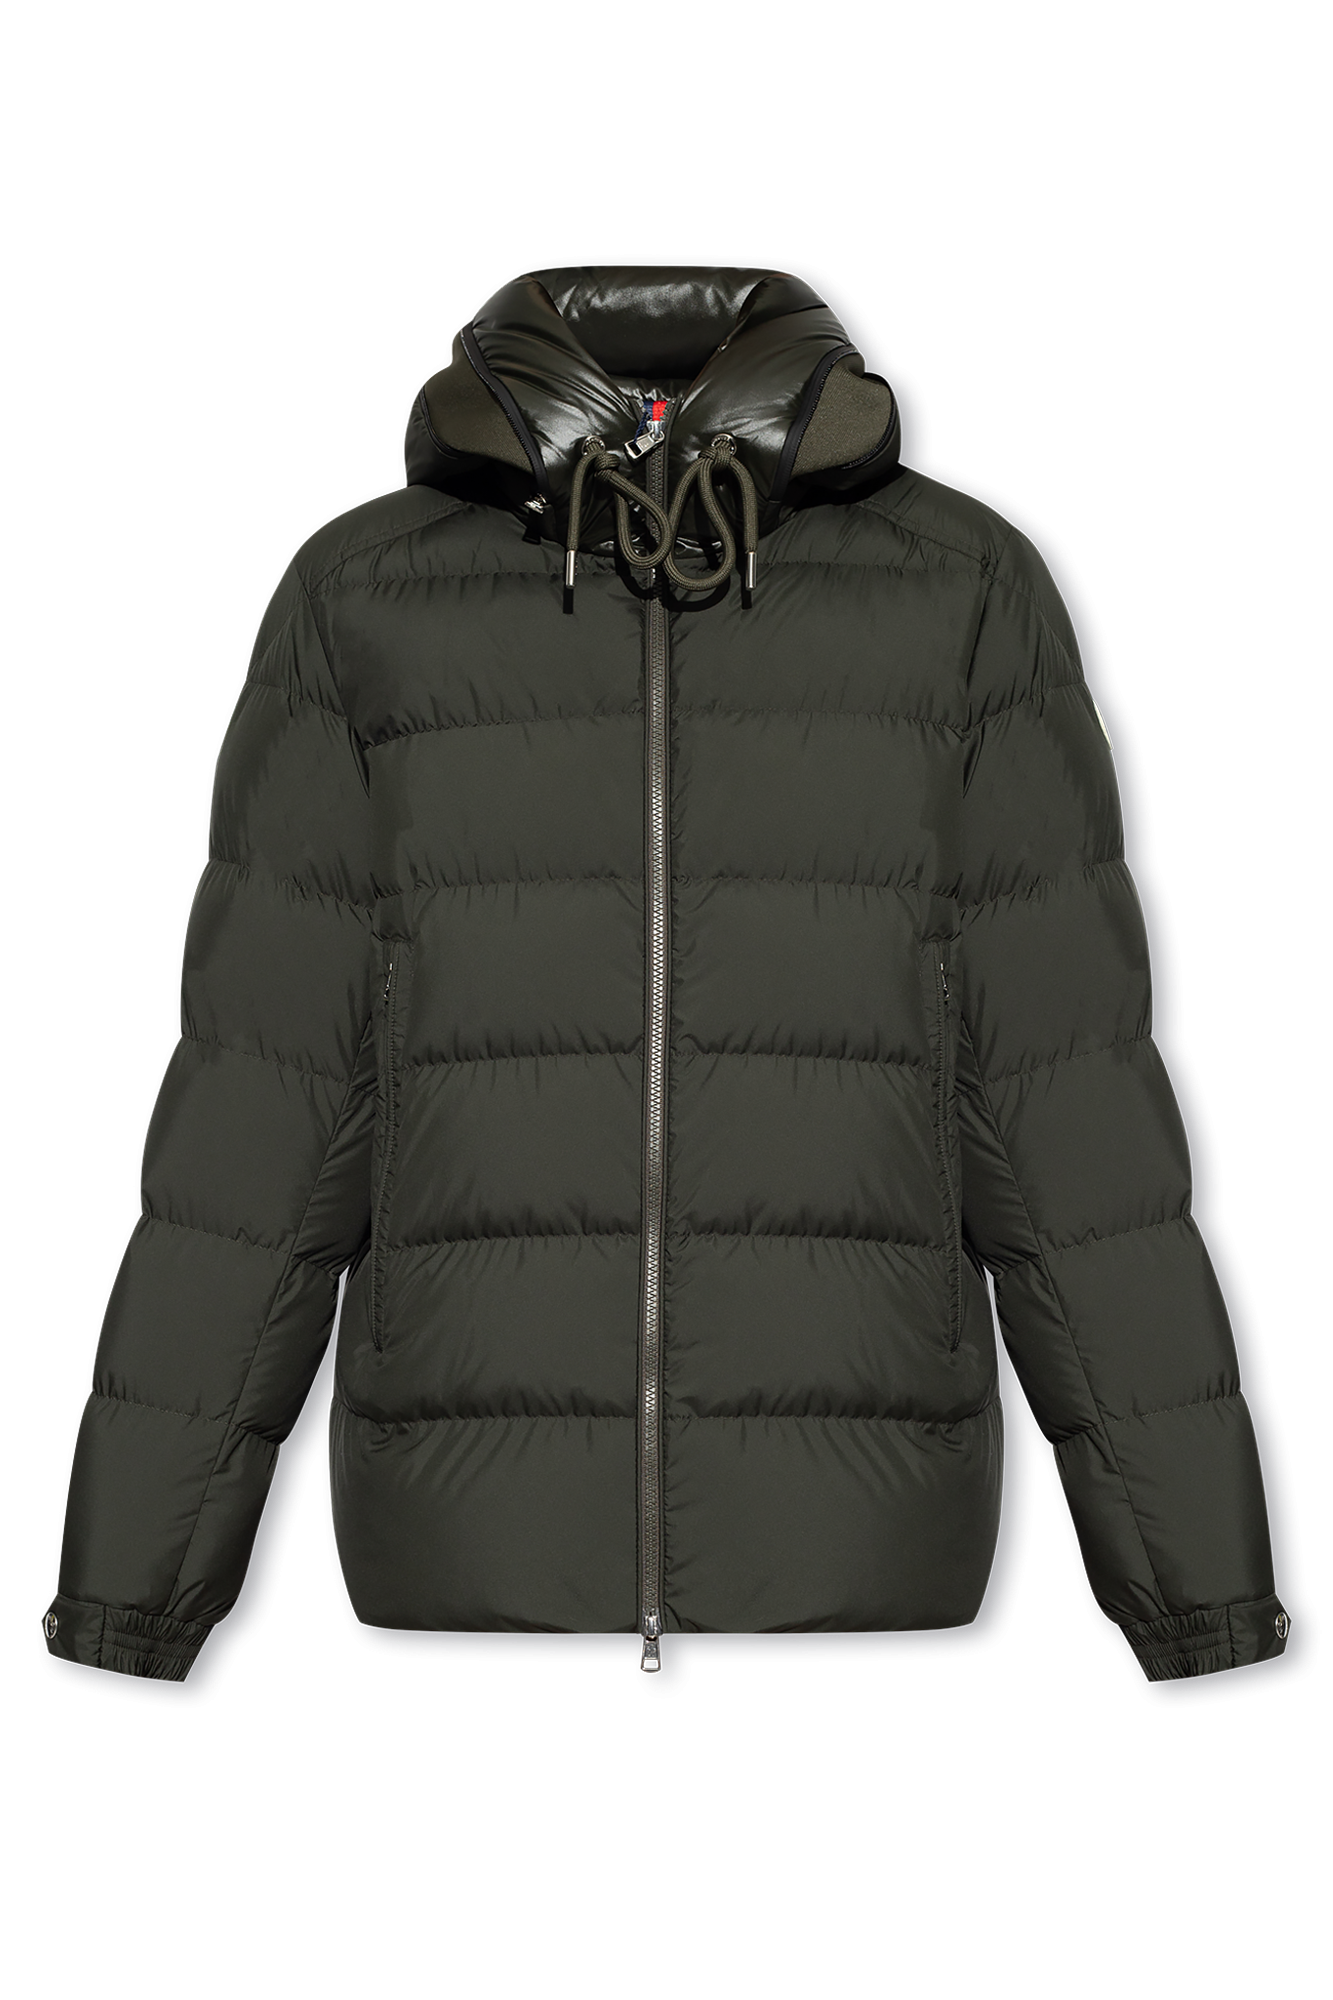 Moncler ‘Cardere’ down jacket